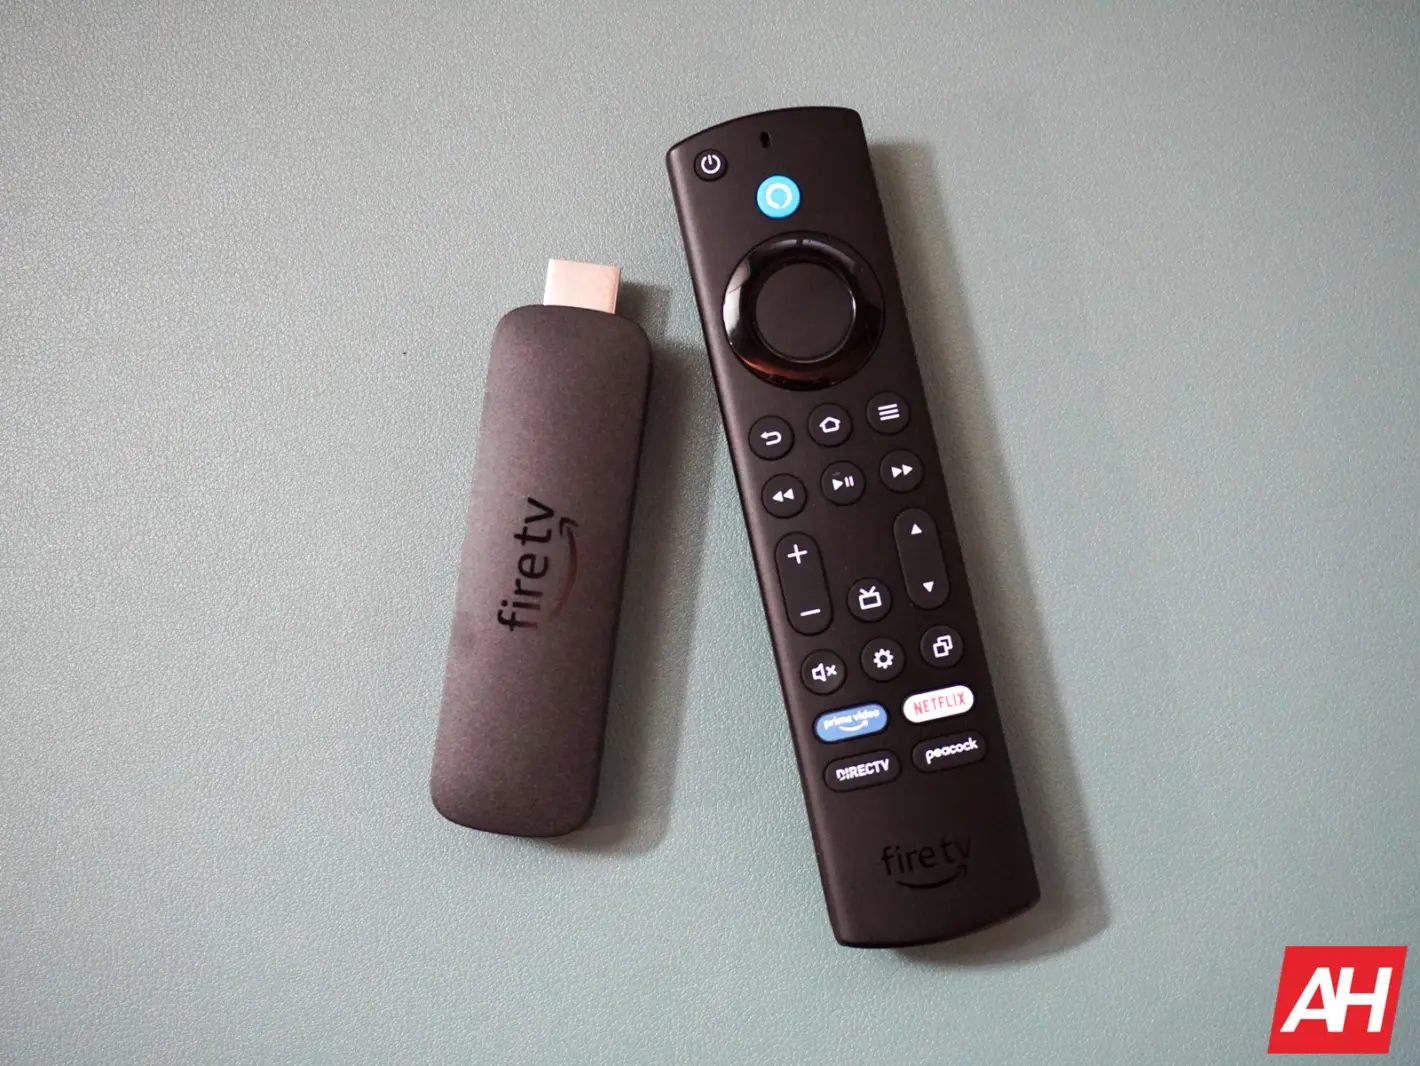 Featured image for Grab the Powerful Fire TV Stick 4K Max for Only $39 on Amazon Now!